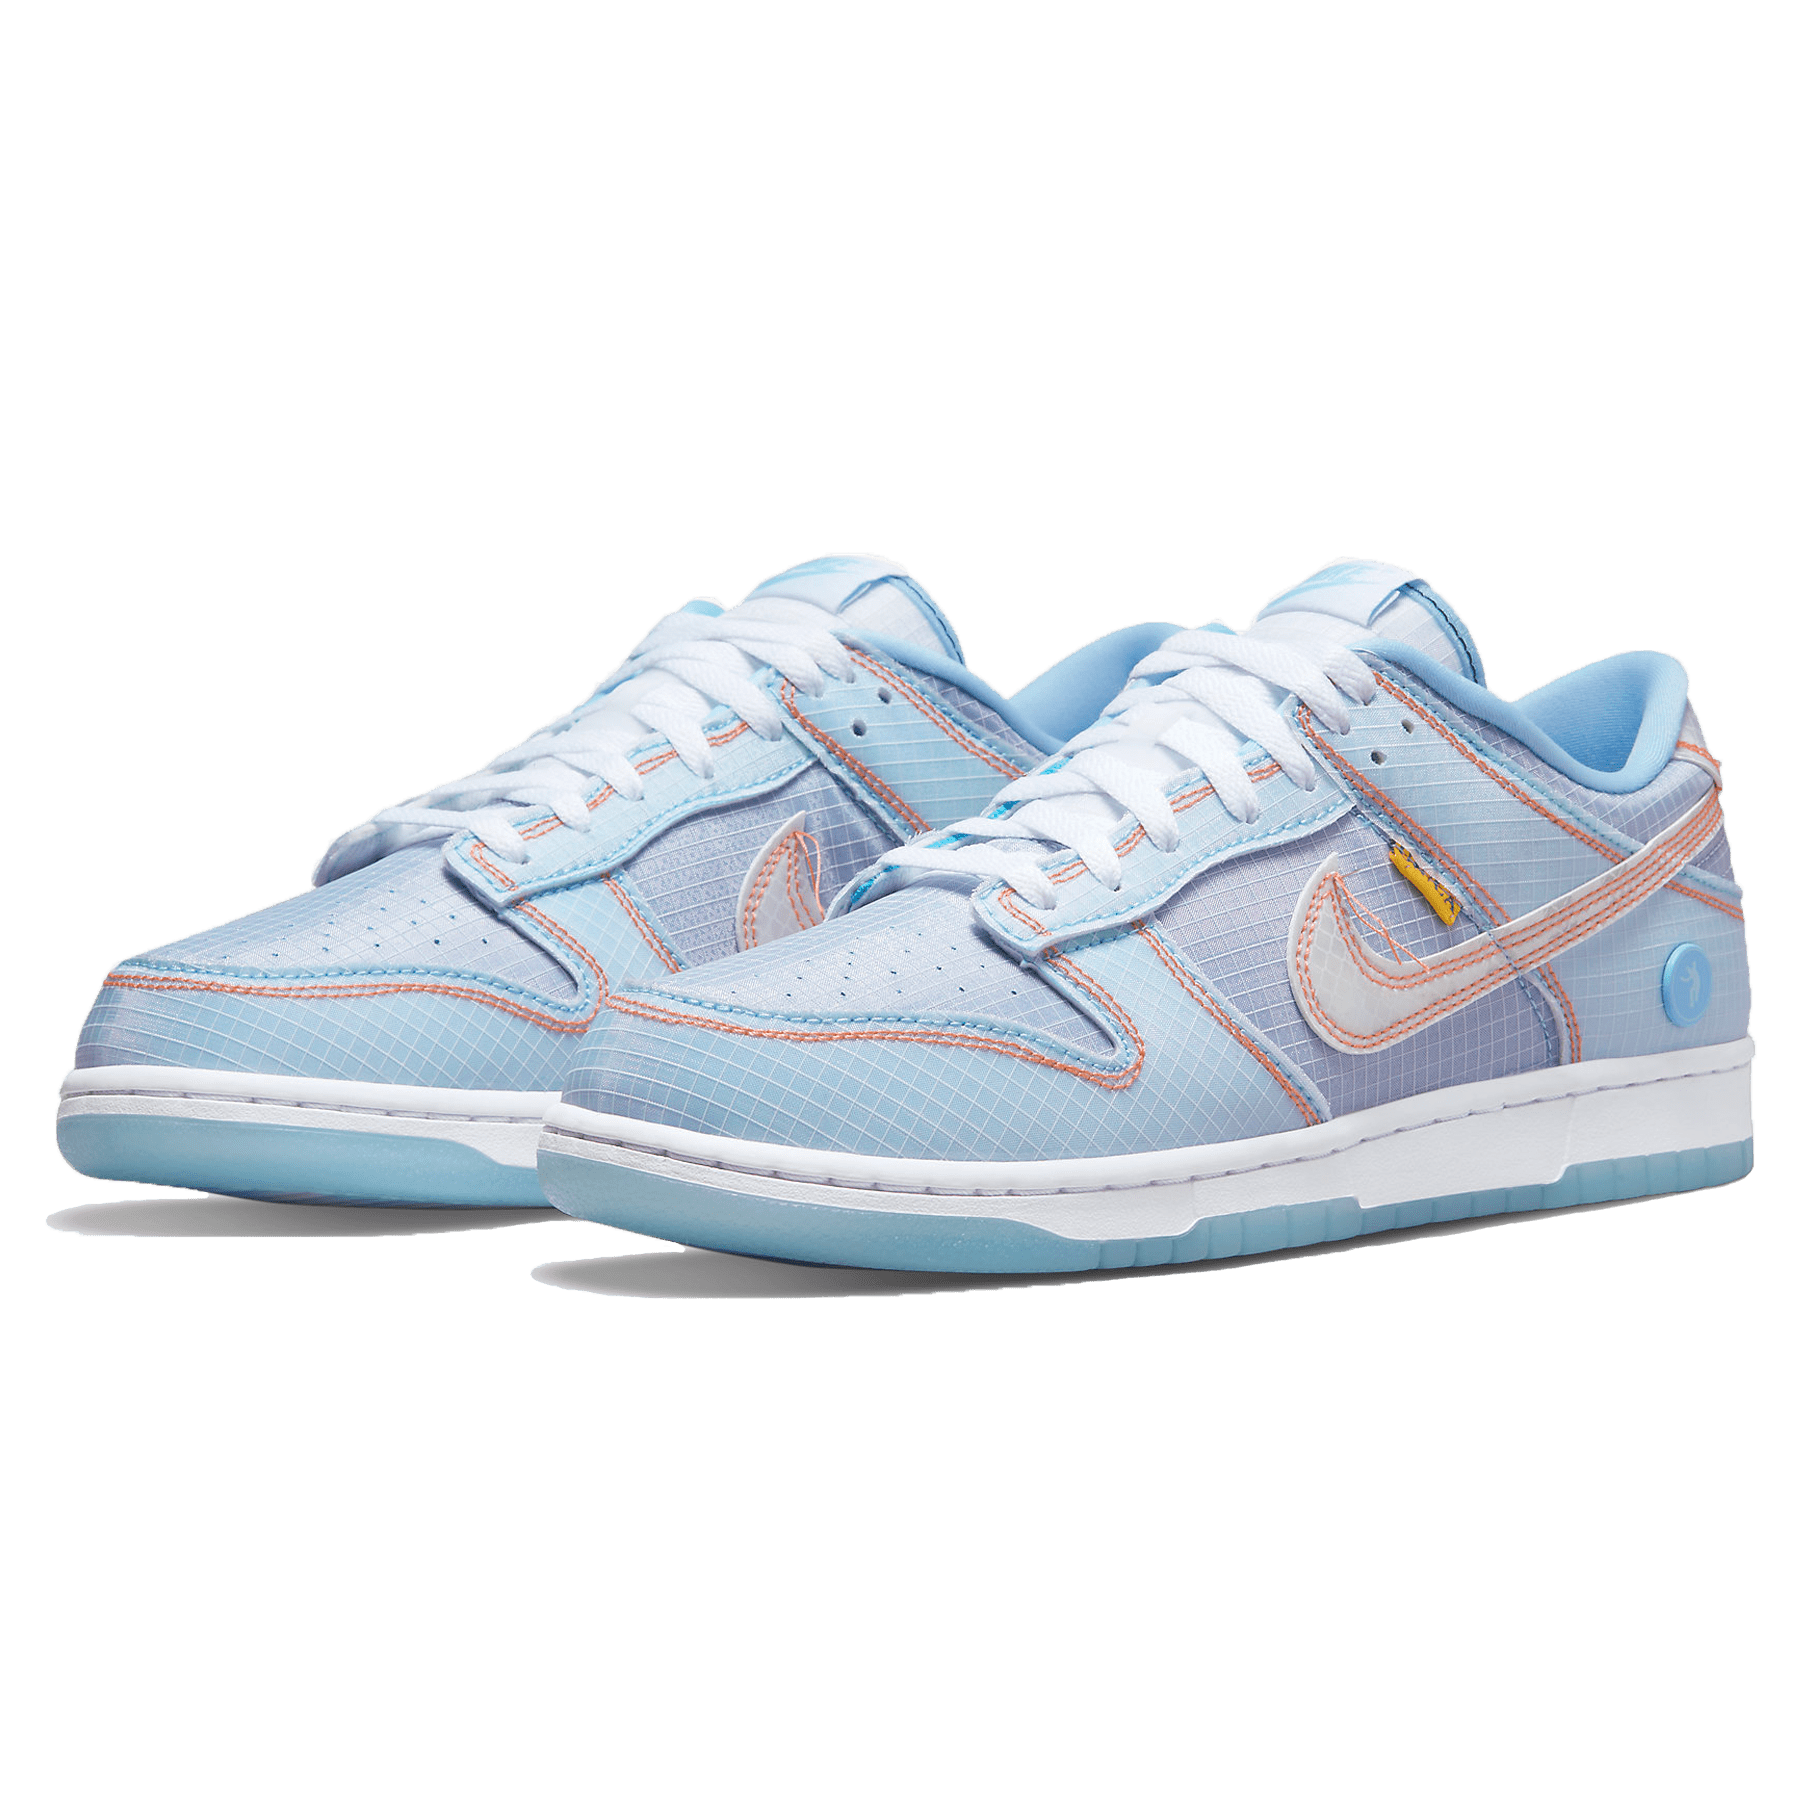 Argon' — OdoiporikonShops - Union LA x Dunk Low 'Passport Pack - here are  all the best Nike deals you need to know about during